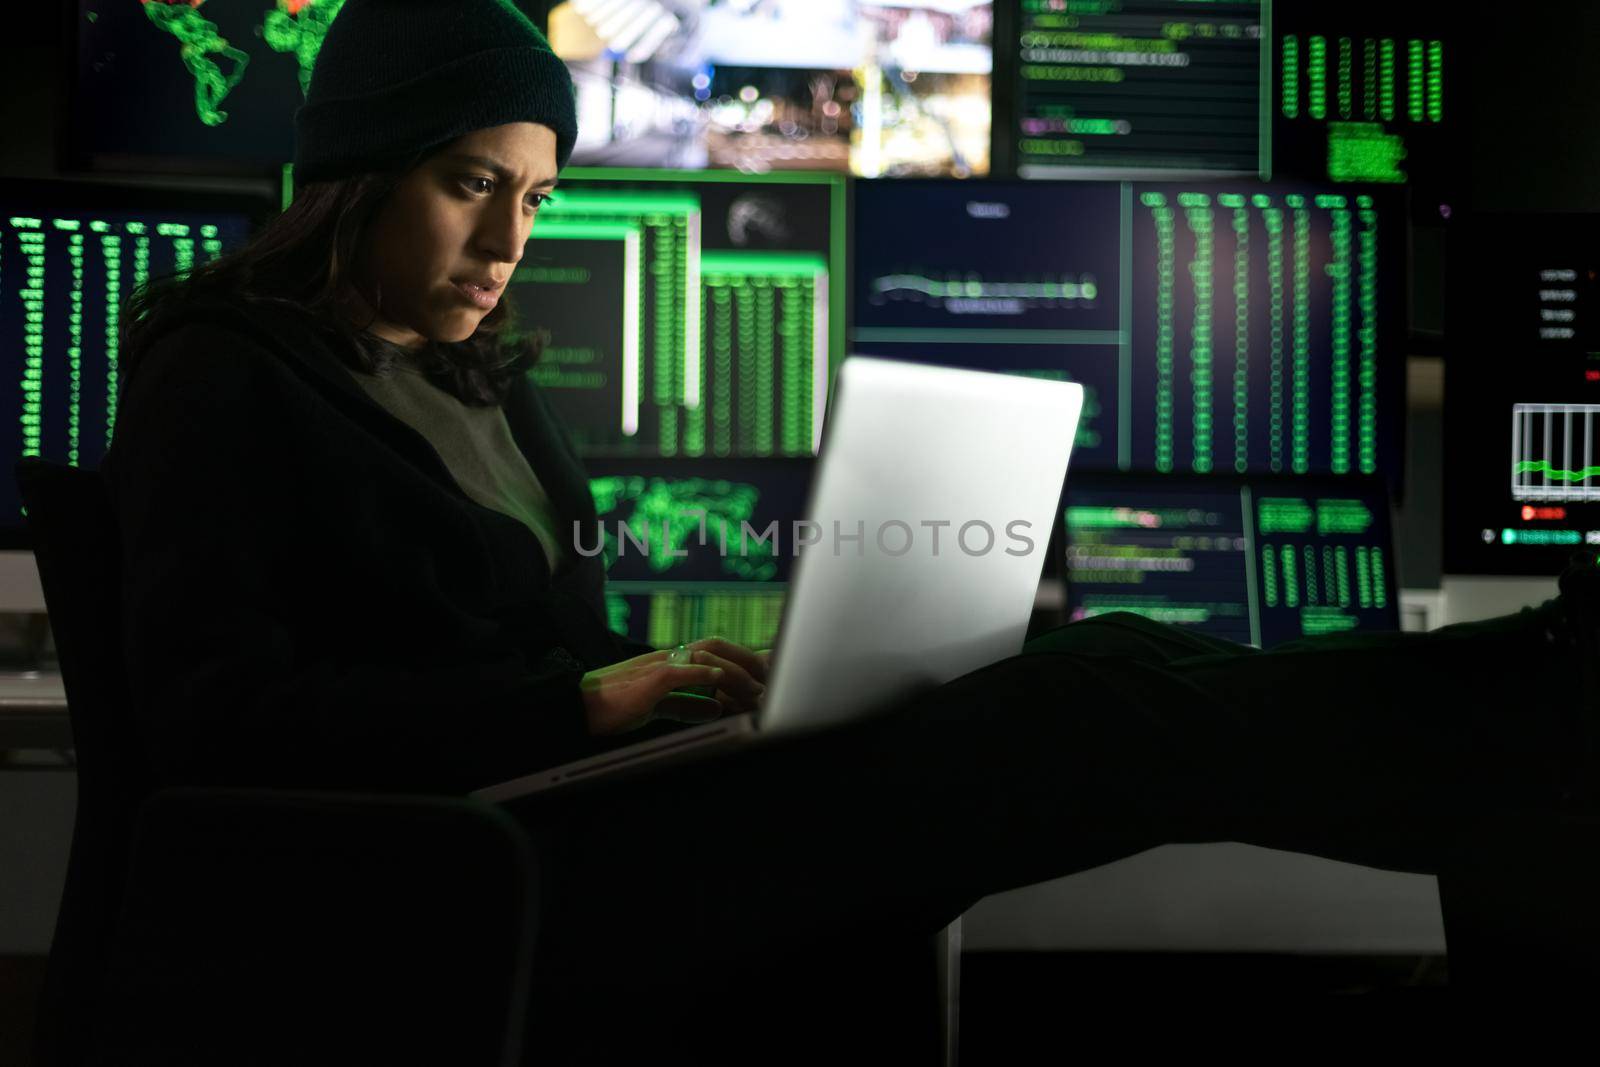 Latina female hacker using laptop to organize malware attack on global scale. Hacking concept.